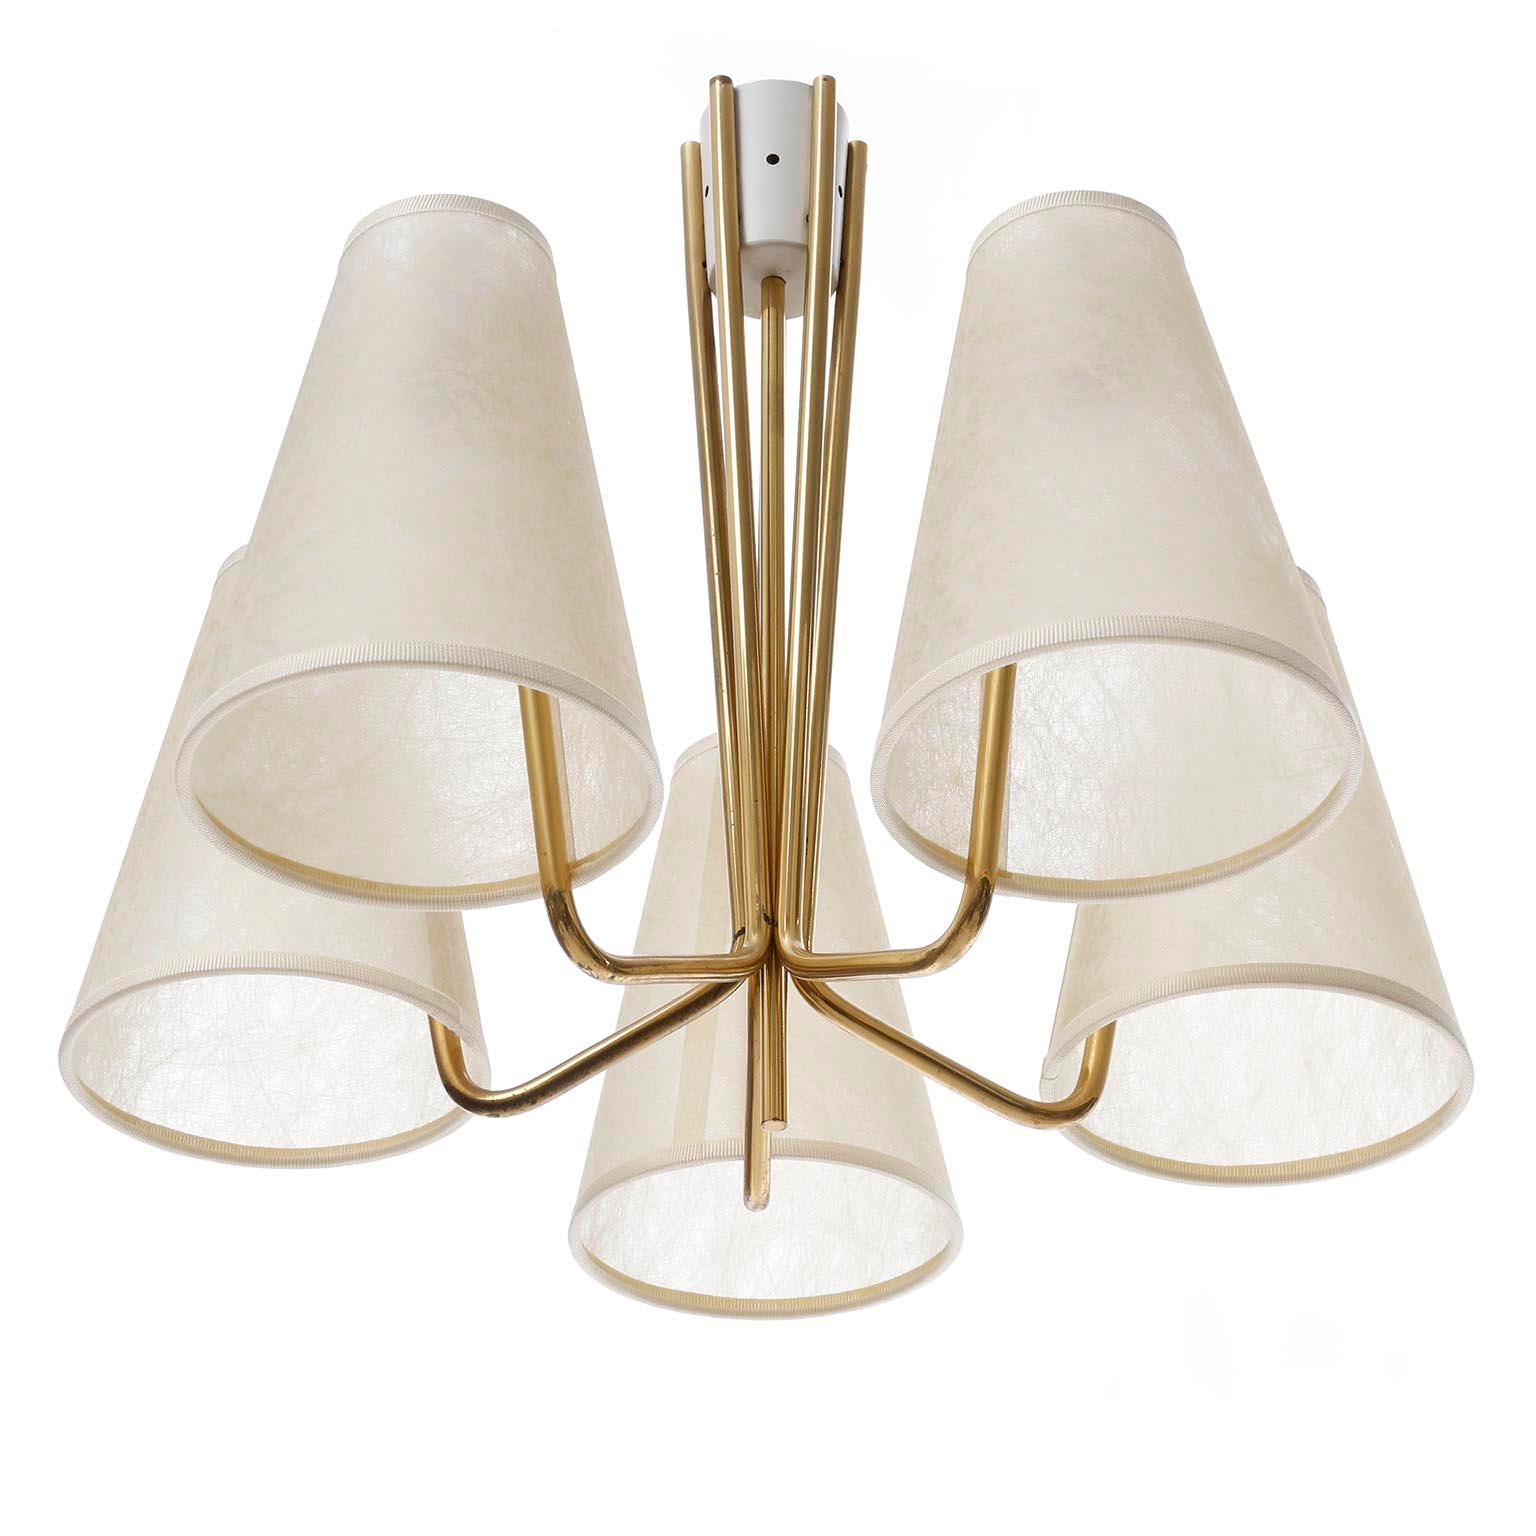 A brass flush mount chandelier model 'ANNABELLE' no. 5181 with five arms and parchment lamp shades by J.T. Kalmar, Vienna, Austria, manufactured in midcentury, ca. 1960 (late 1950s or early 1960s).
The light is documented in the Kalmar catalogue